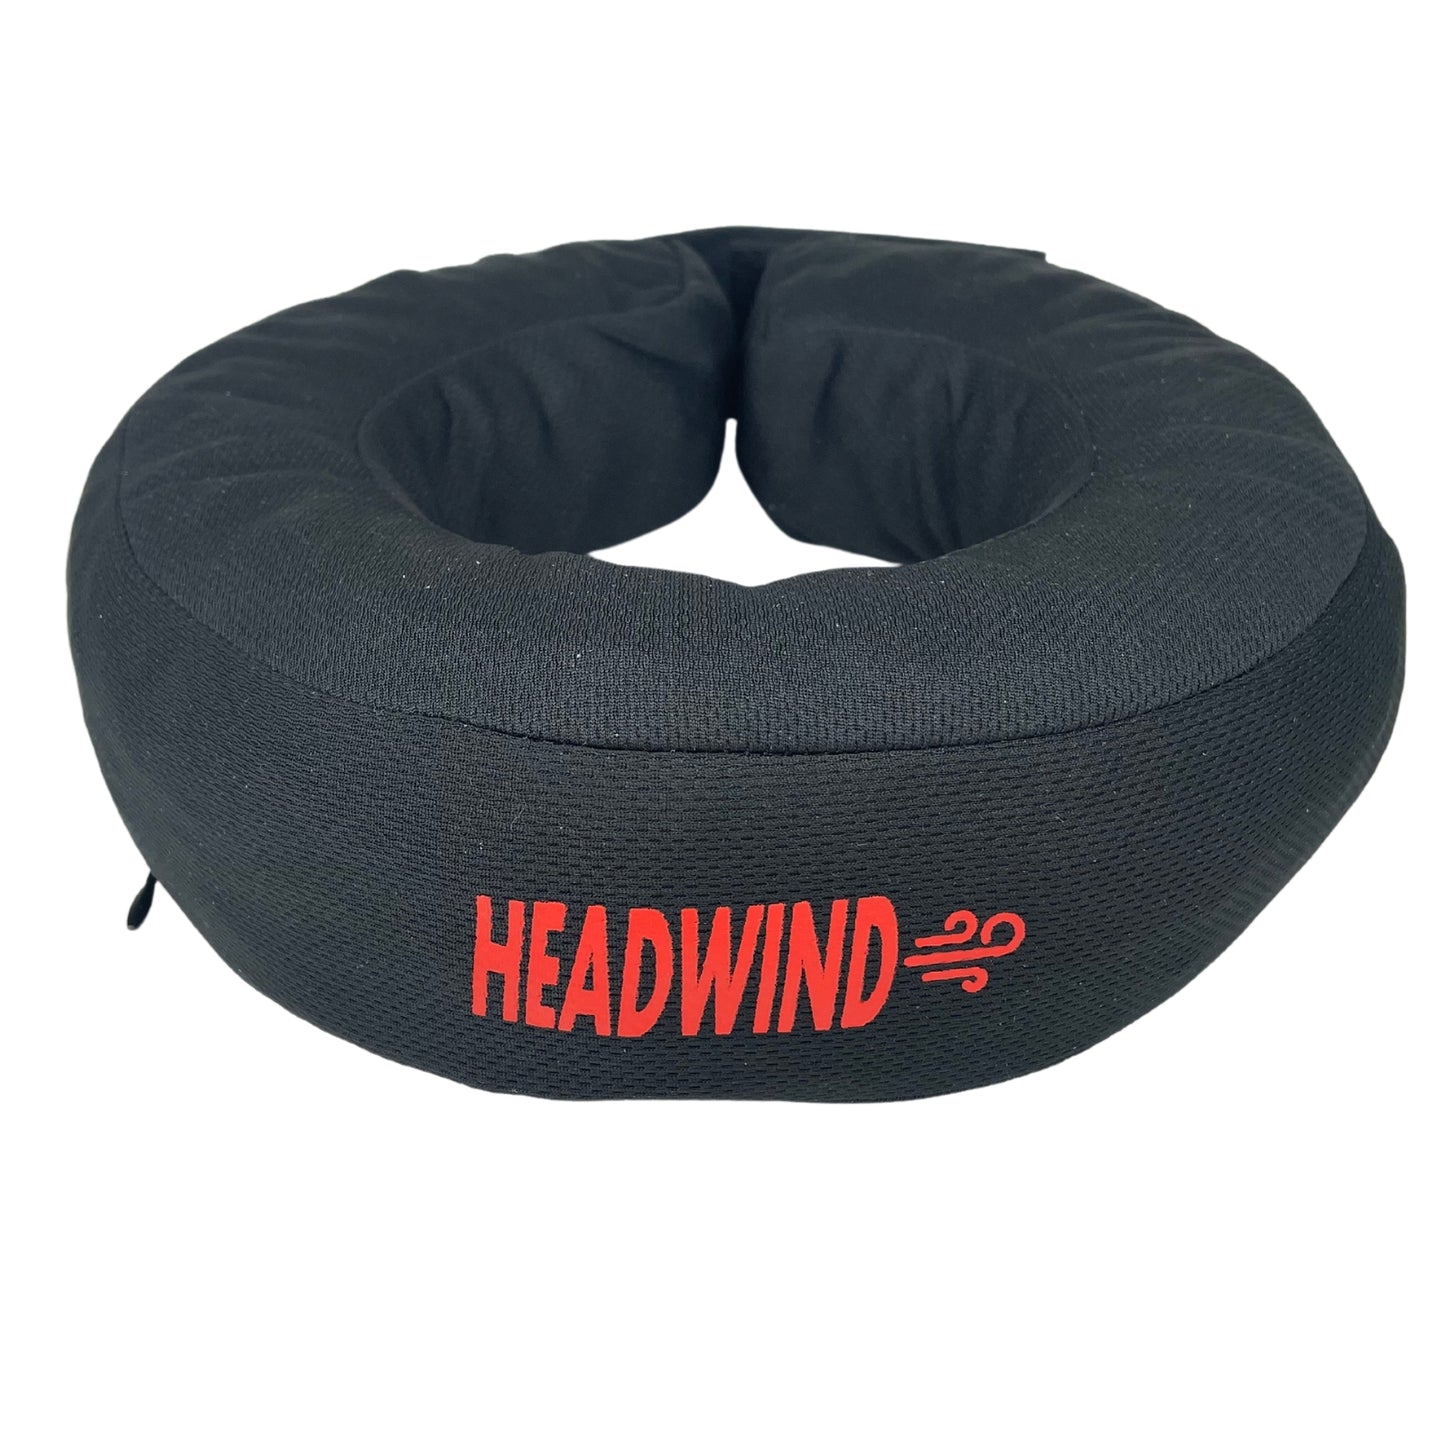 Black Headwind Neck Ring main image with red logo